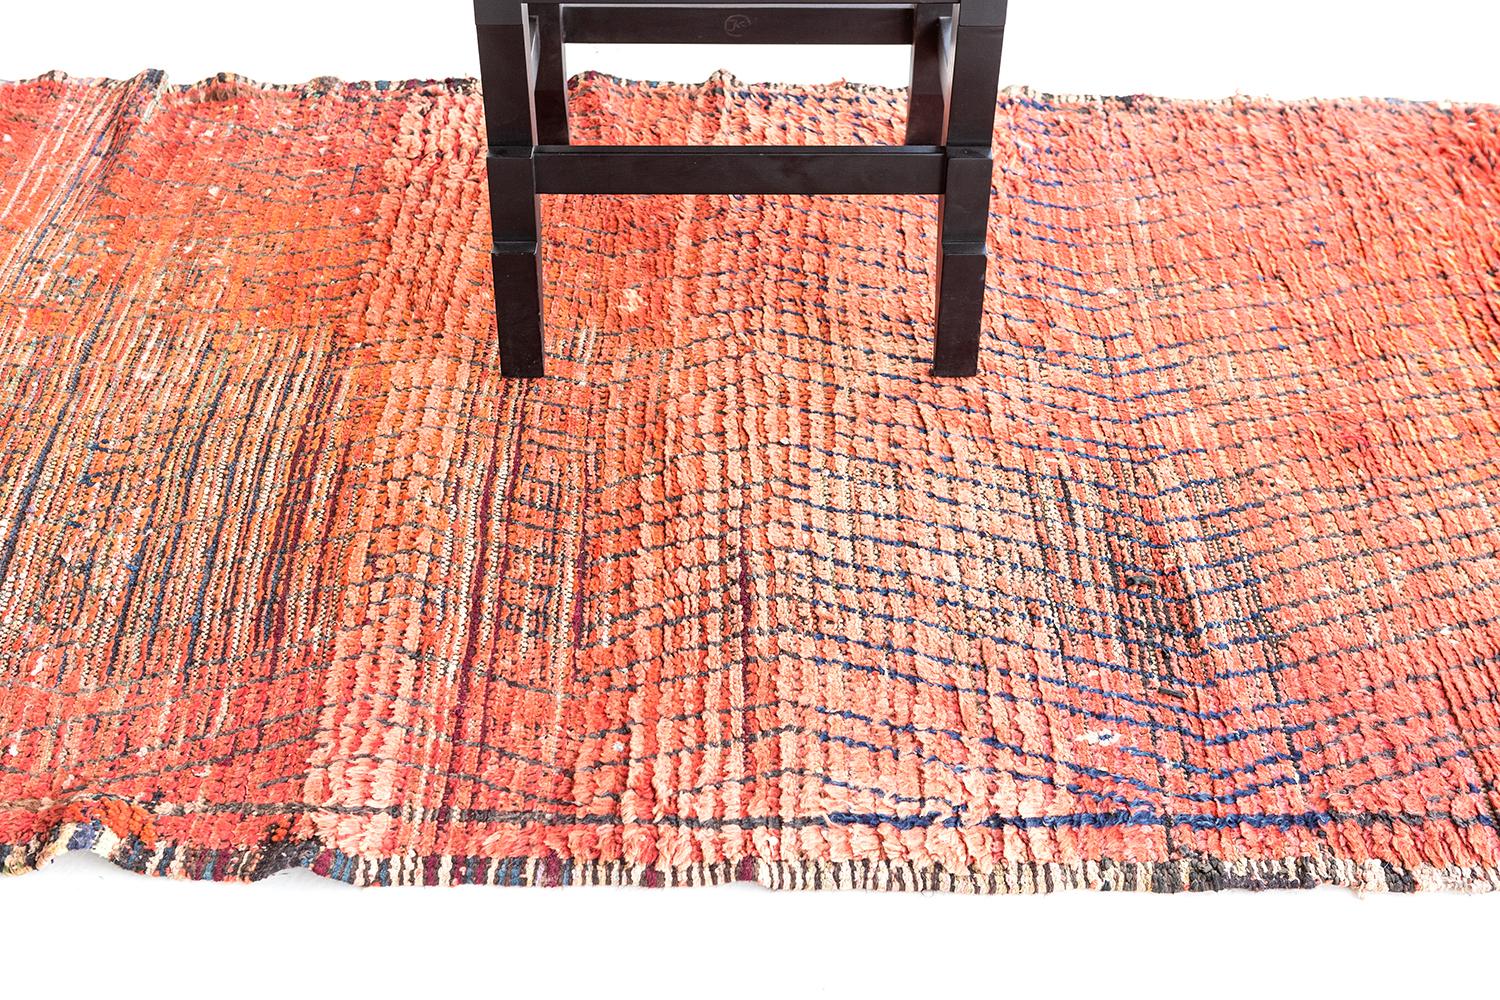 This captivating Azilal Tribe Moroccan rug from Atlas collection will let your home interior inviting to the eyes of your guest. All-over natural charcoal zigzags with extended sides defined in a clay field. Simple but classy kind of rug that makes